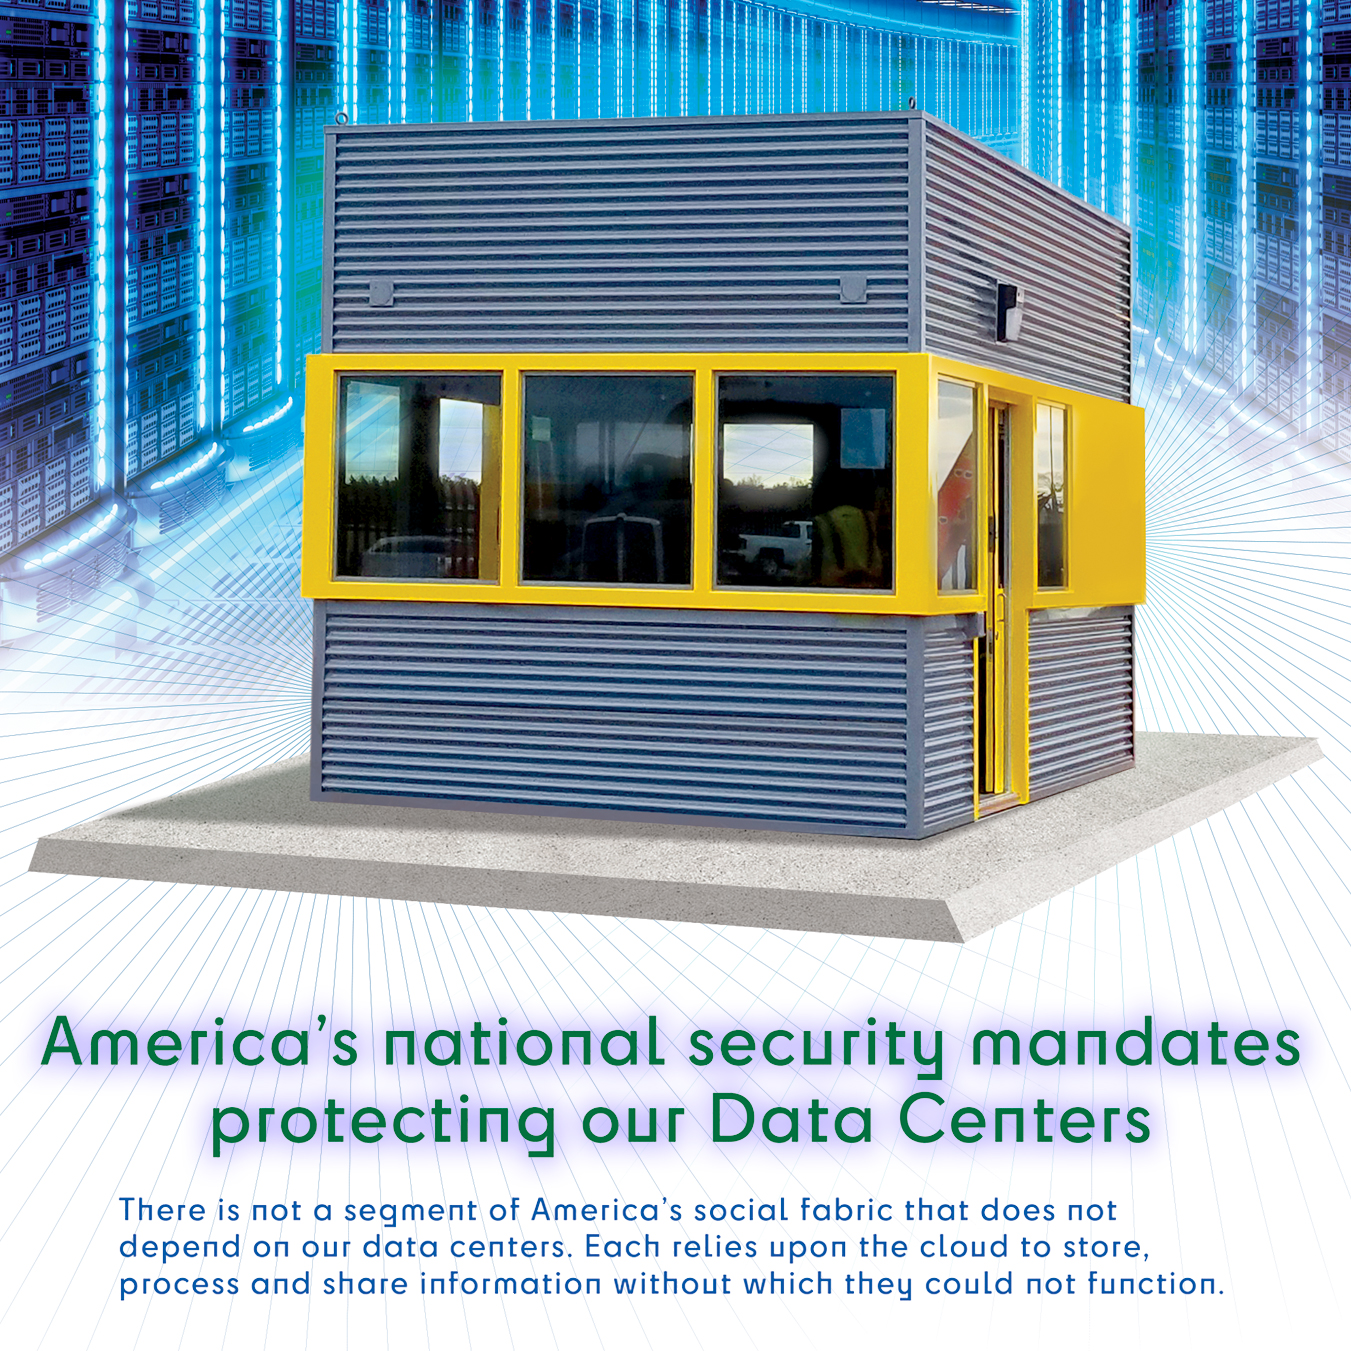 America's national security mandates protecting our data centers